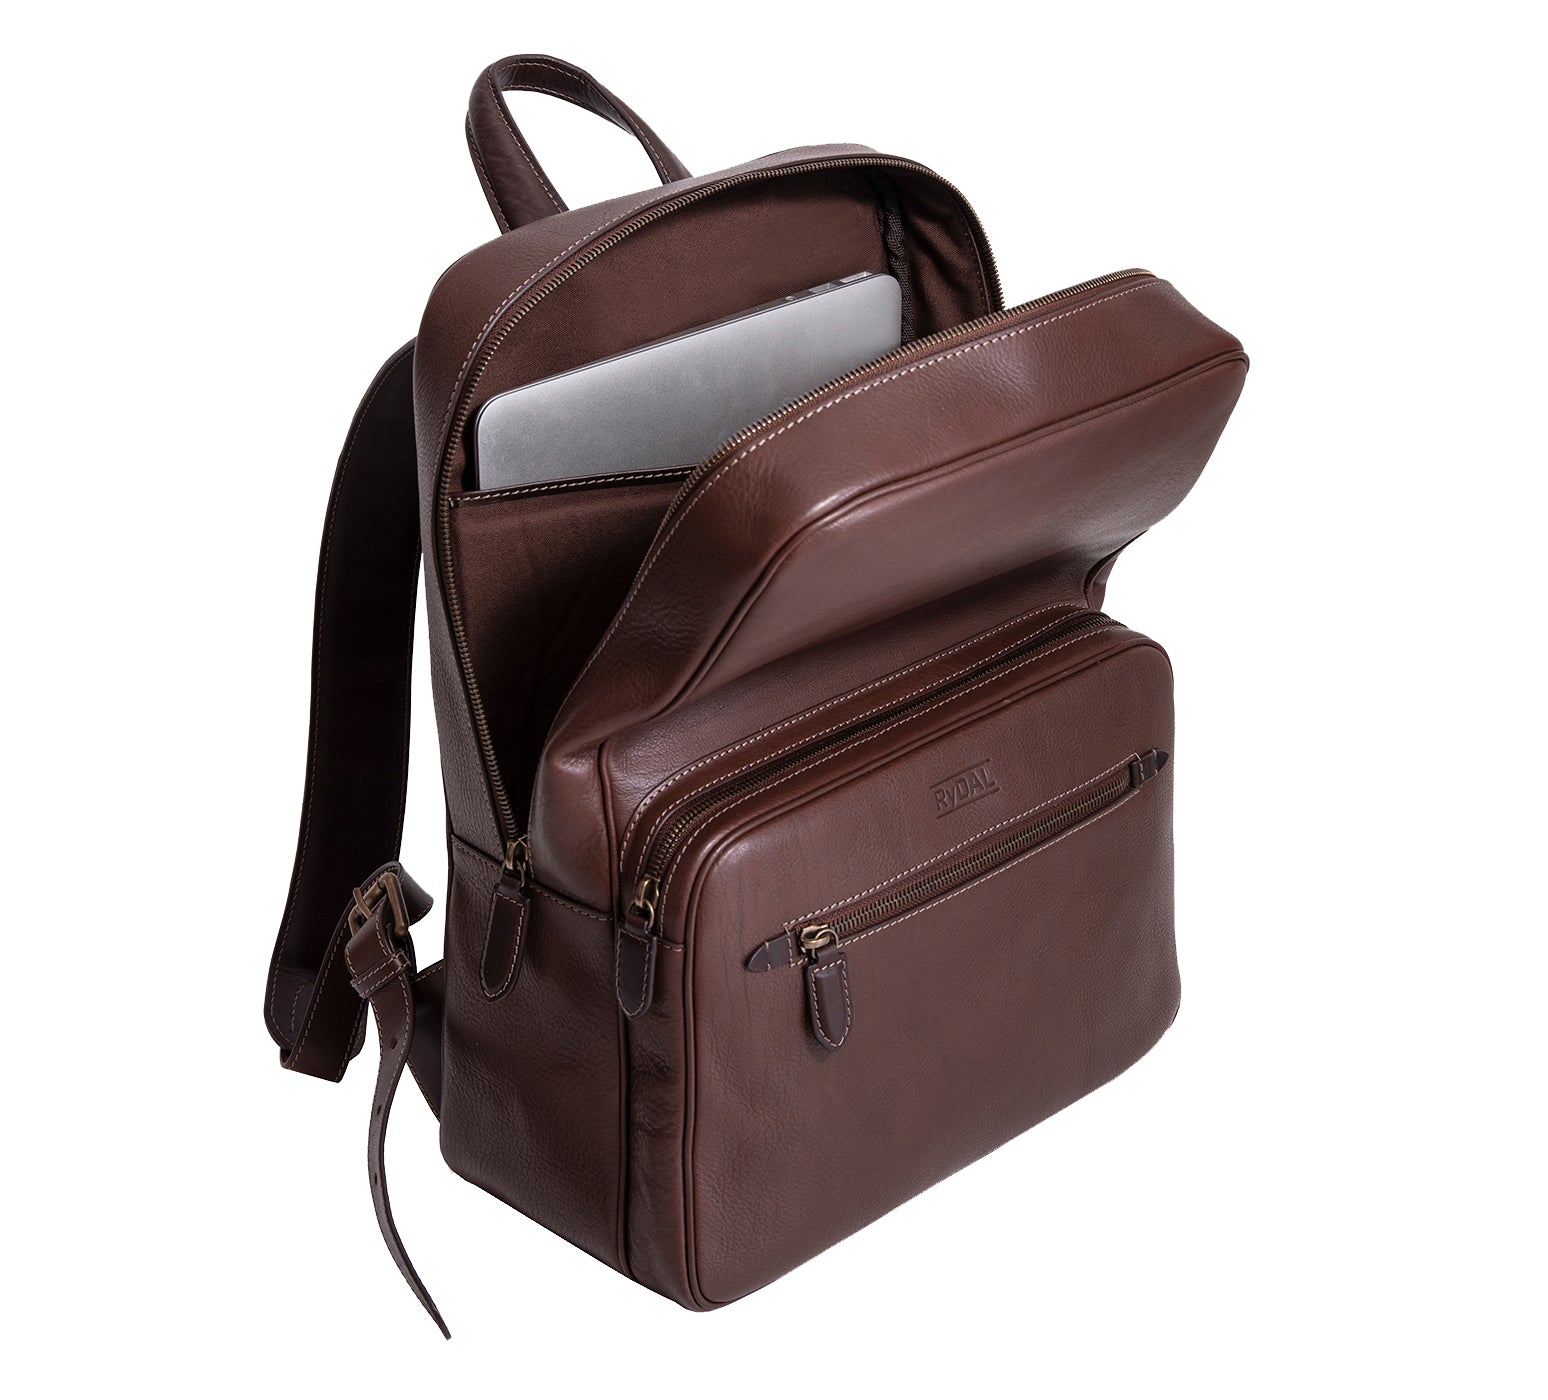 The Henley Mens Leather Backpack from Rydal in 'Dark Brown' open.